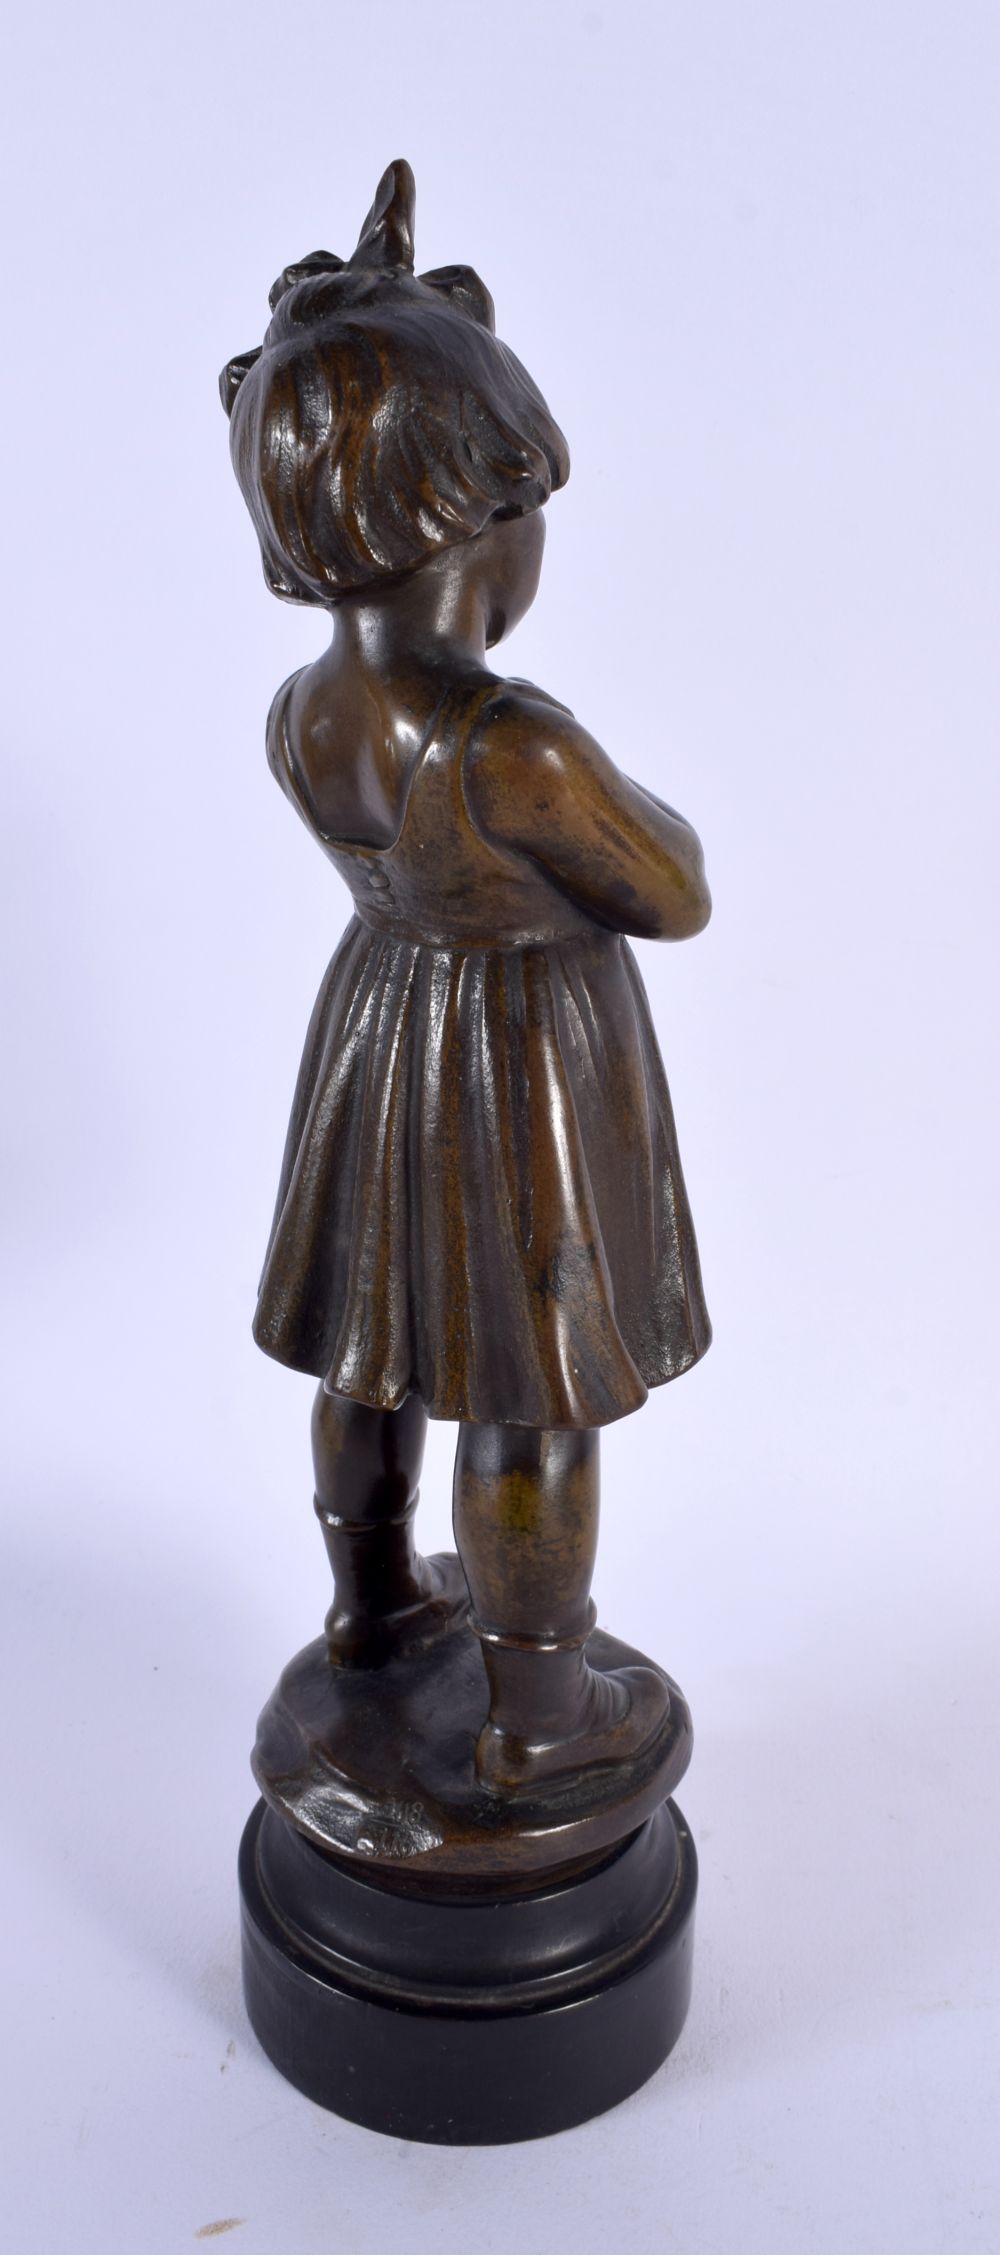 AN ART DECO EUROPEAN BRONZE FIGURE OF A YOUNG GIRL modelled holding a teddy bear. 27 cm high. - Image 4 of 5